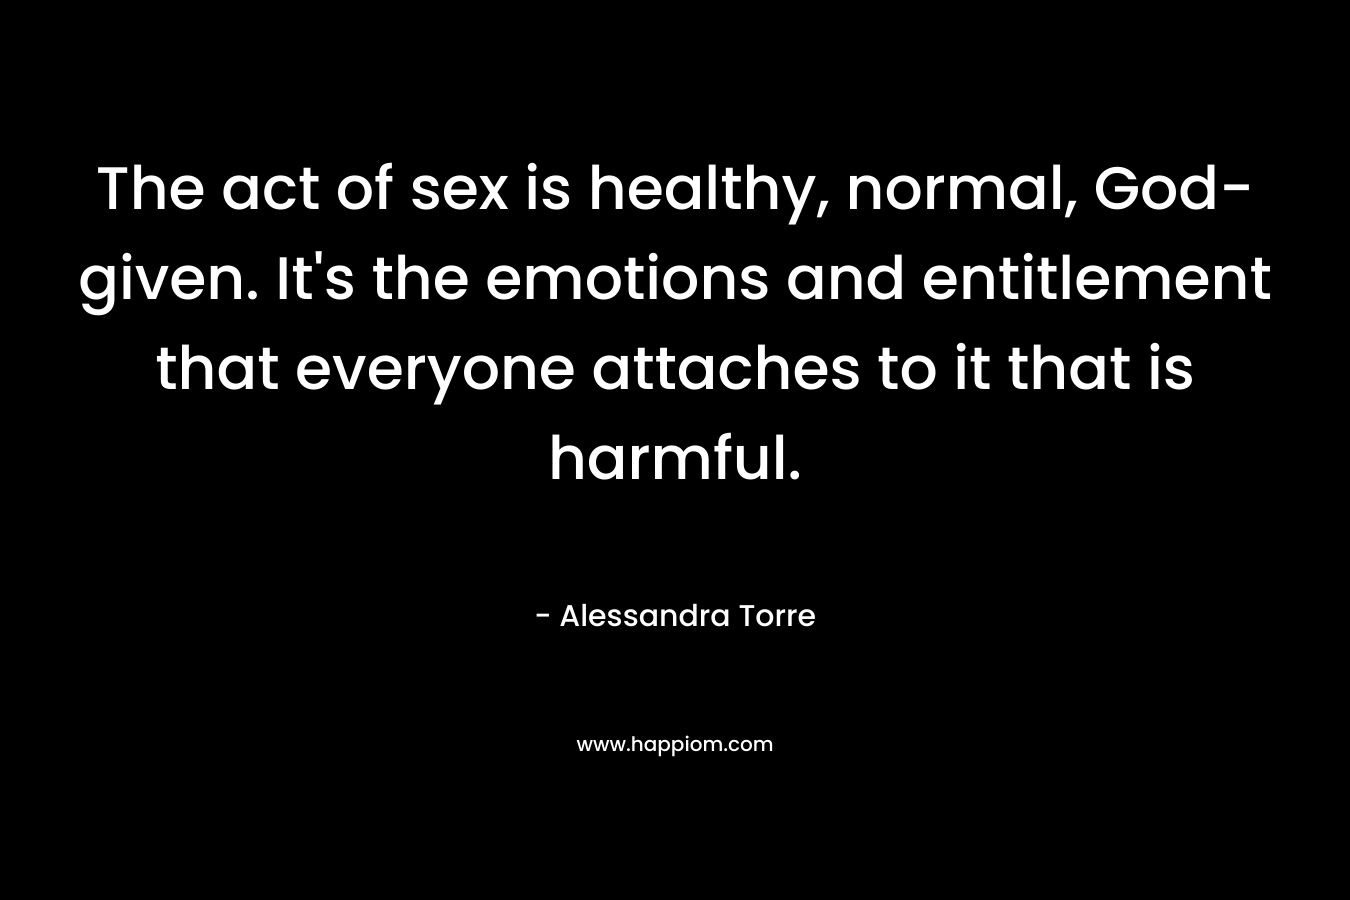 The act of sex is healthy, normal, God-given. It’s the emotions and entitlement that everyone attaches to it that is harmful. – Alessandra Torre